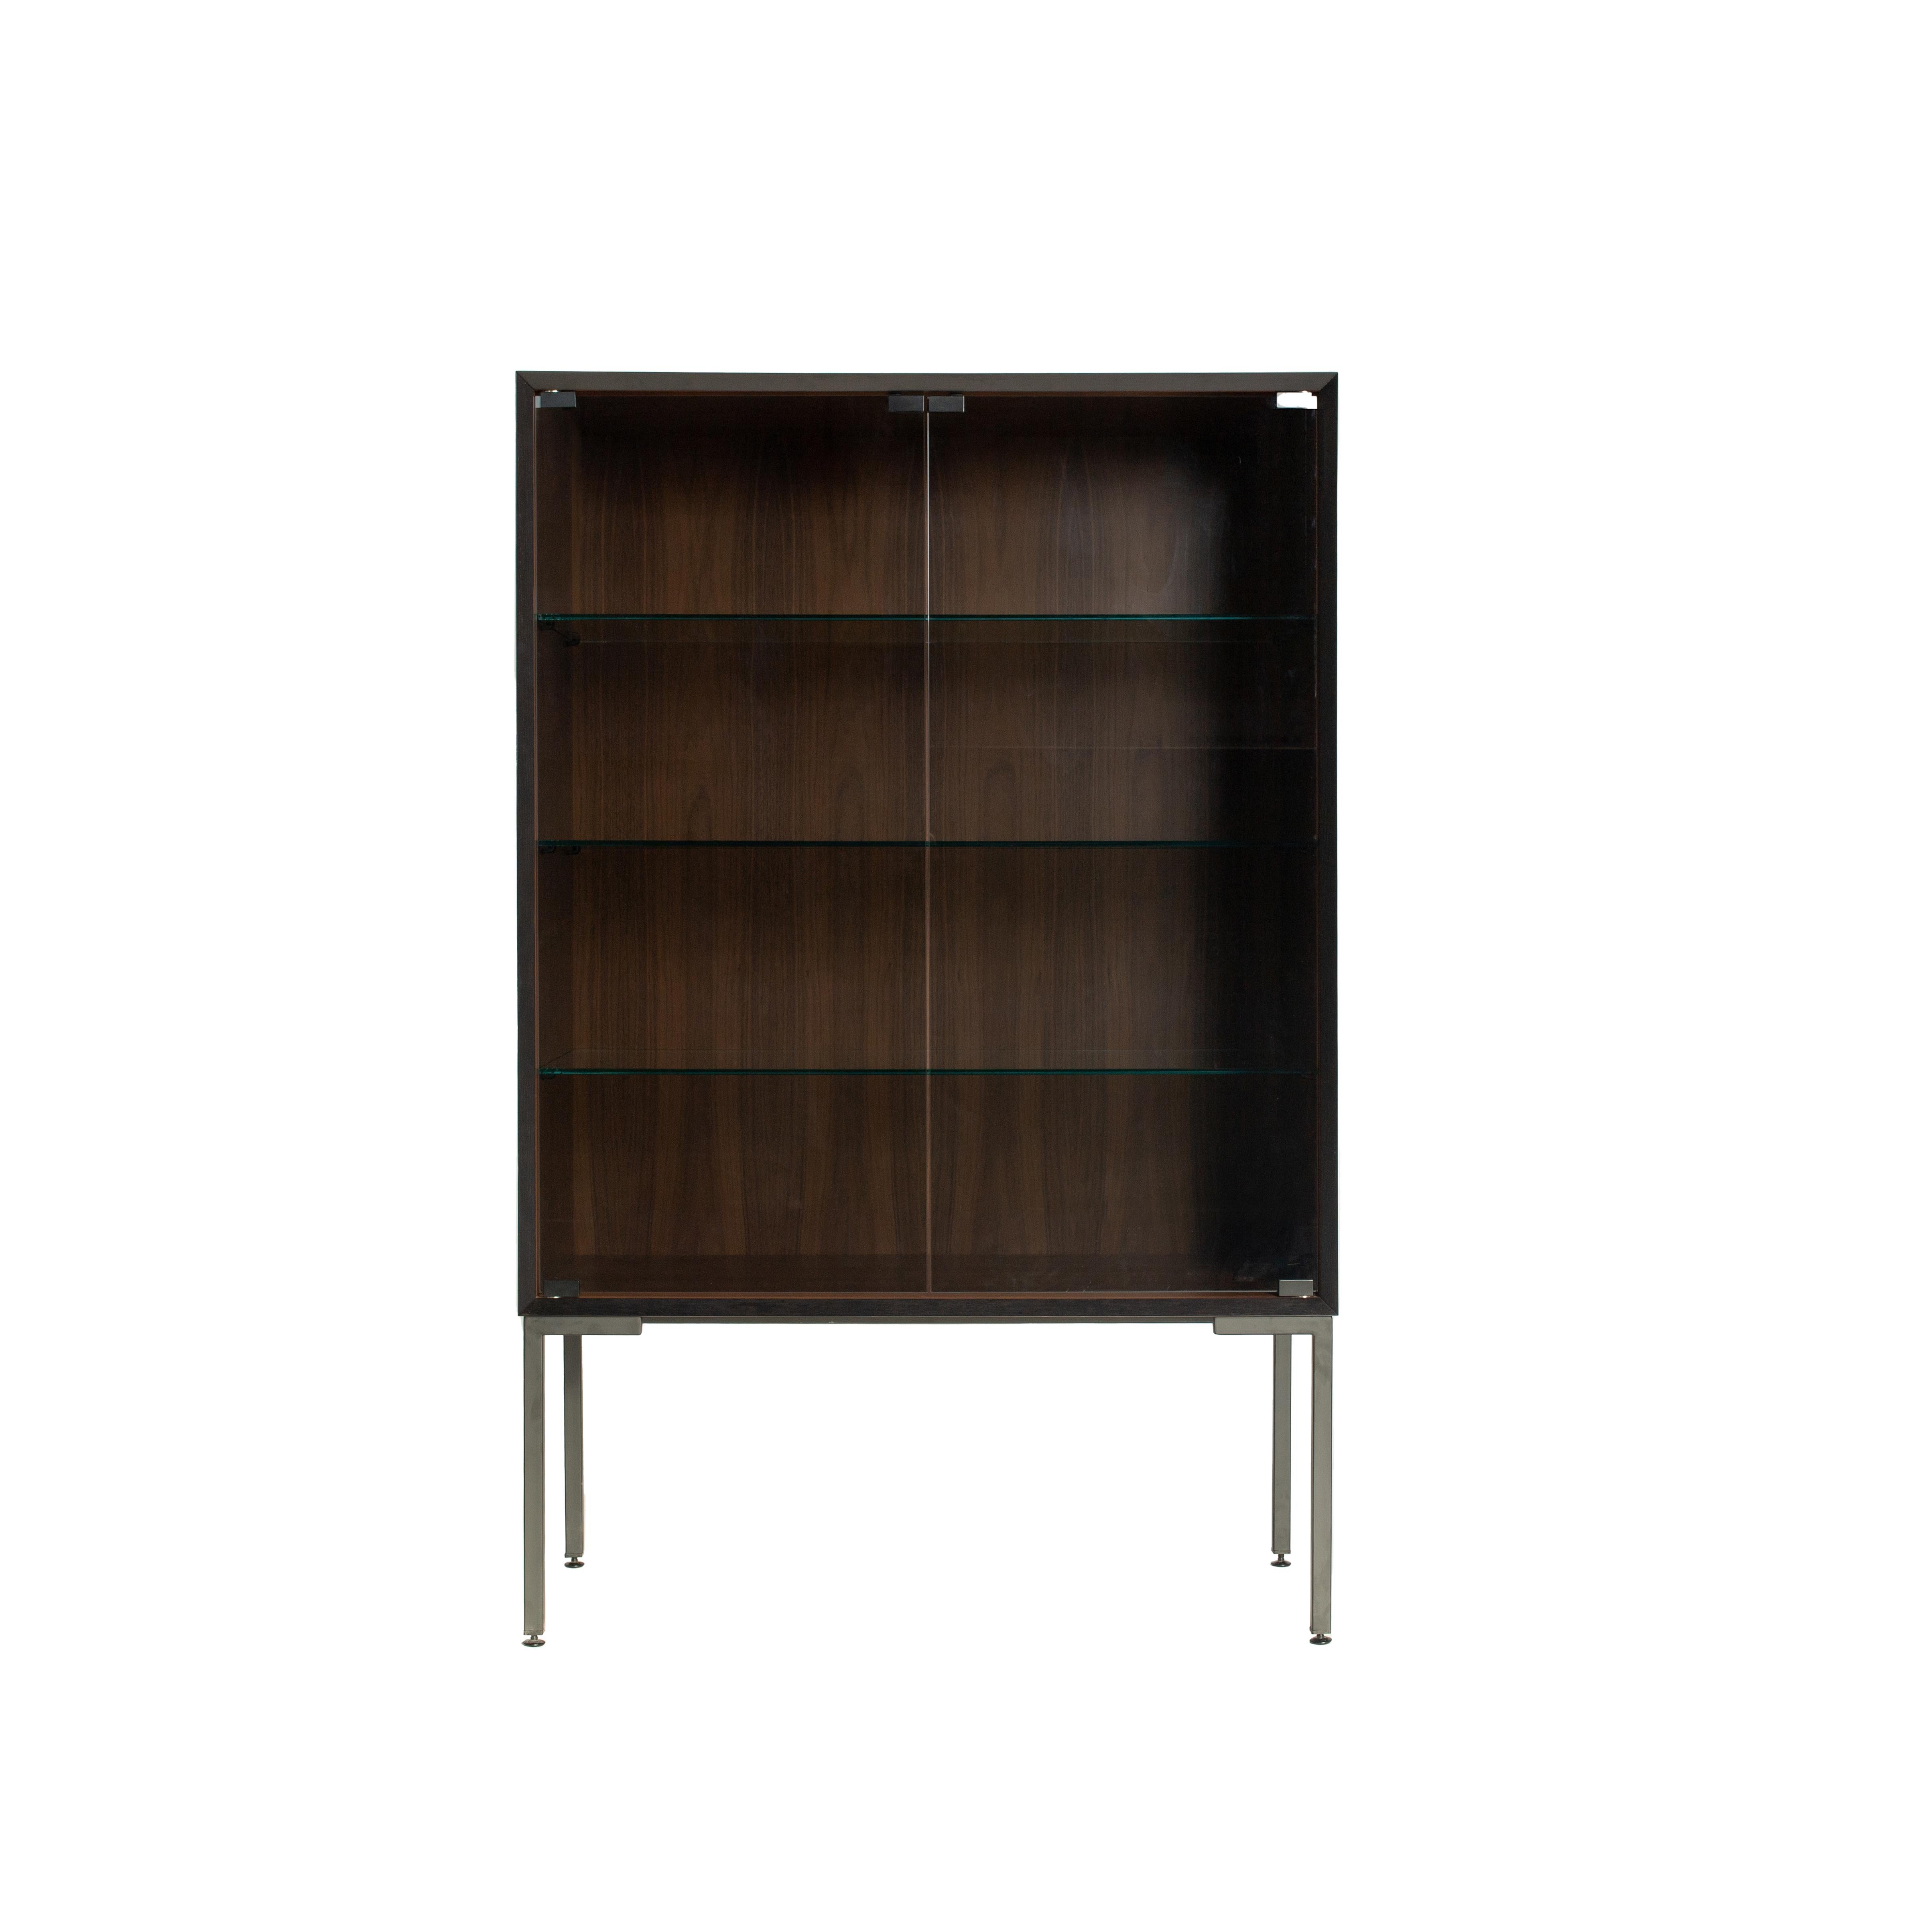 Italian 21st Century Cubo Inlaid Cabinet in Ash and Maple, Made in Italy by Hebanon For Sale